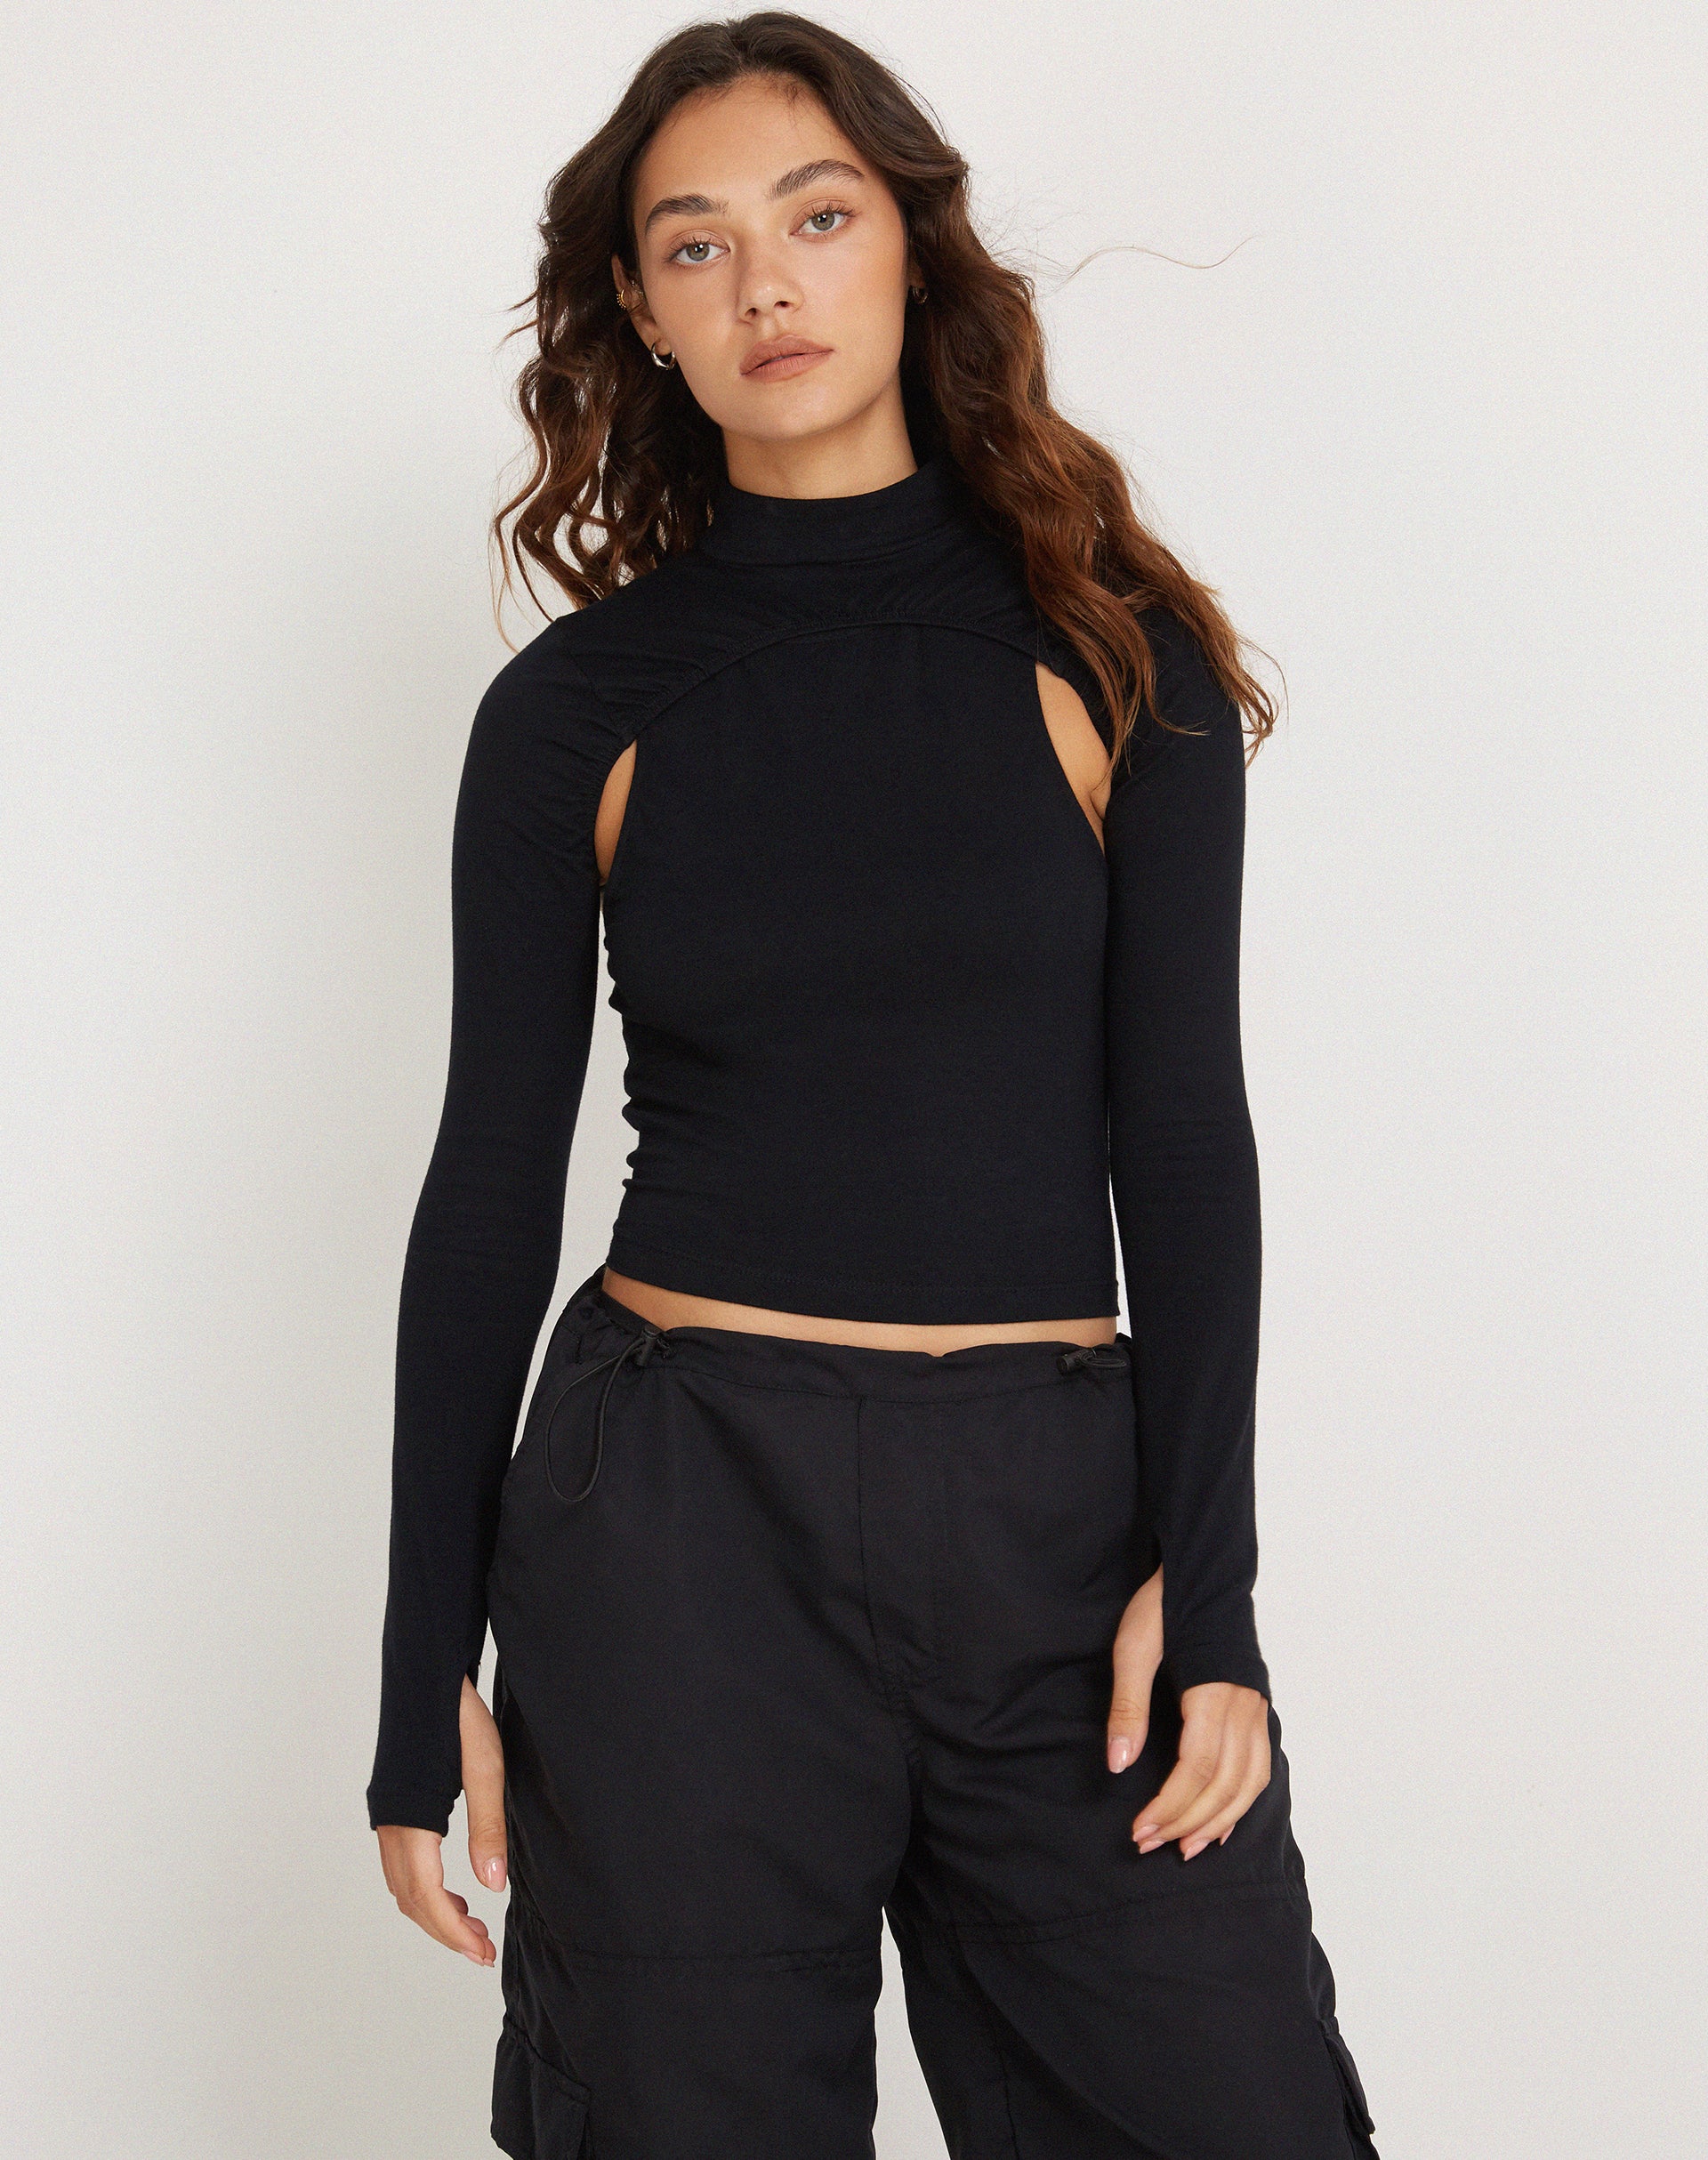 image of Bandi Long Sleeve High Neck Cut Out Top in Black